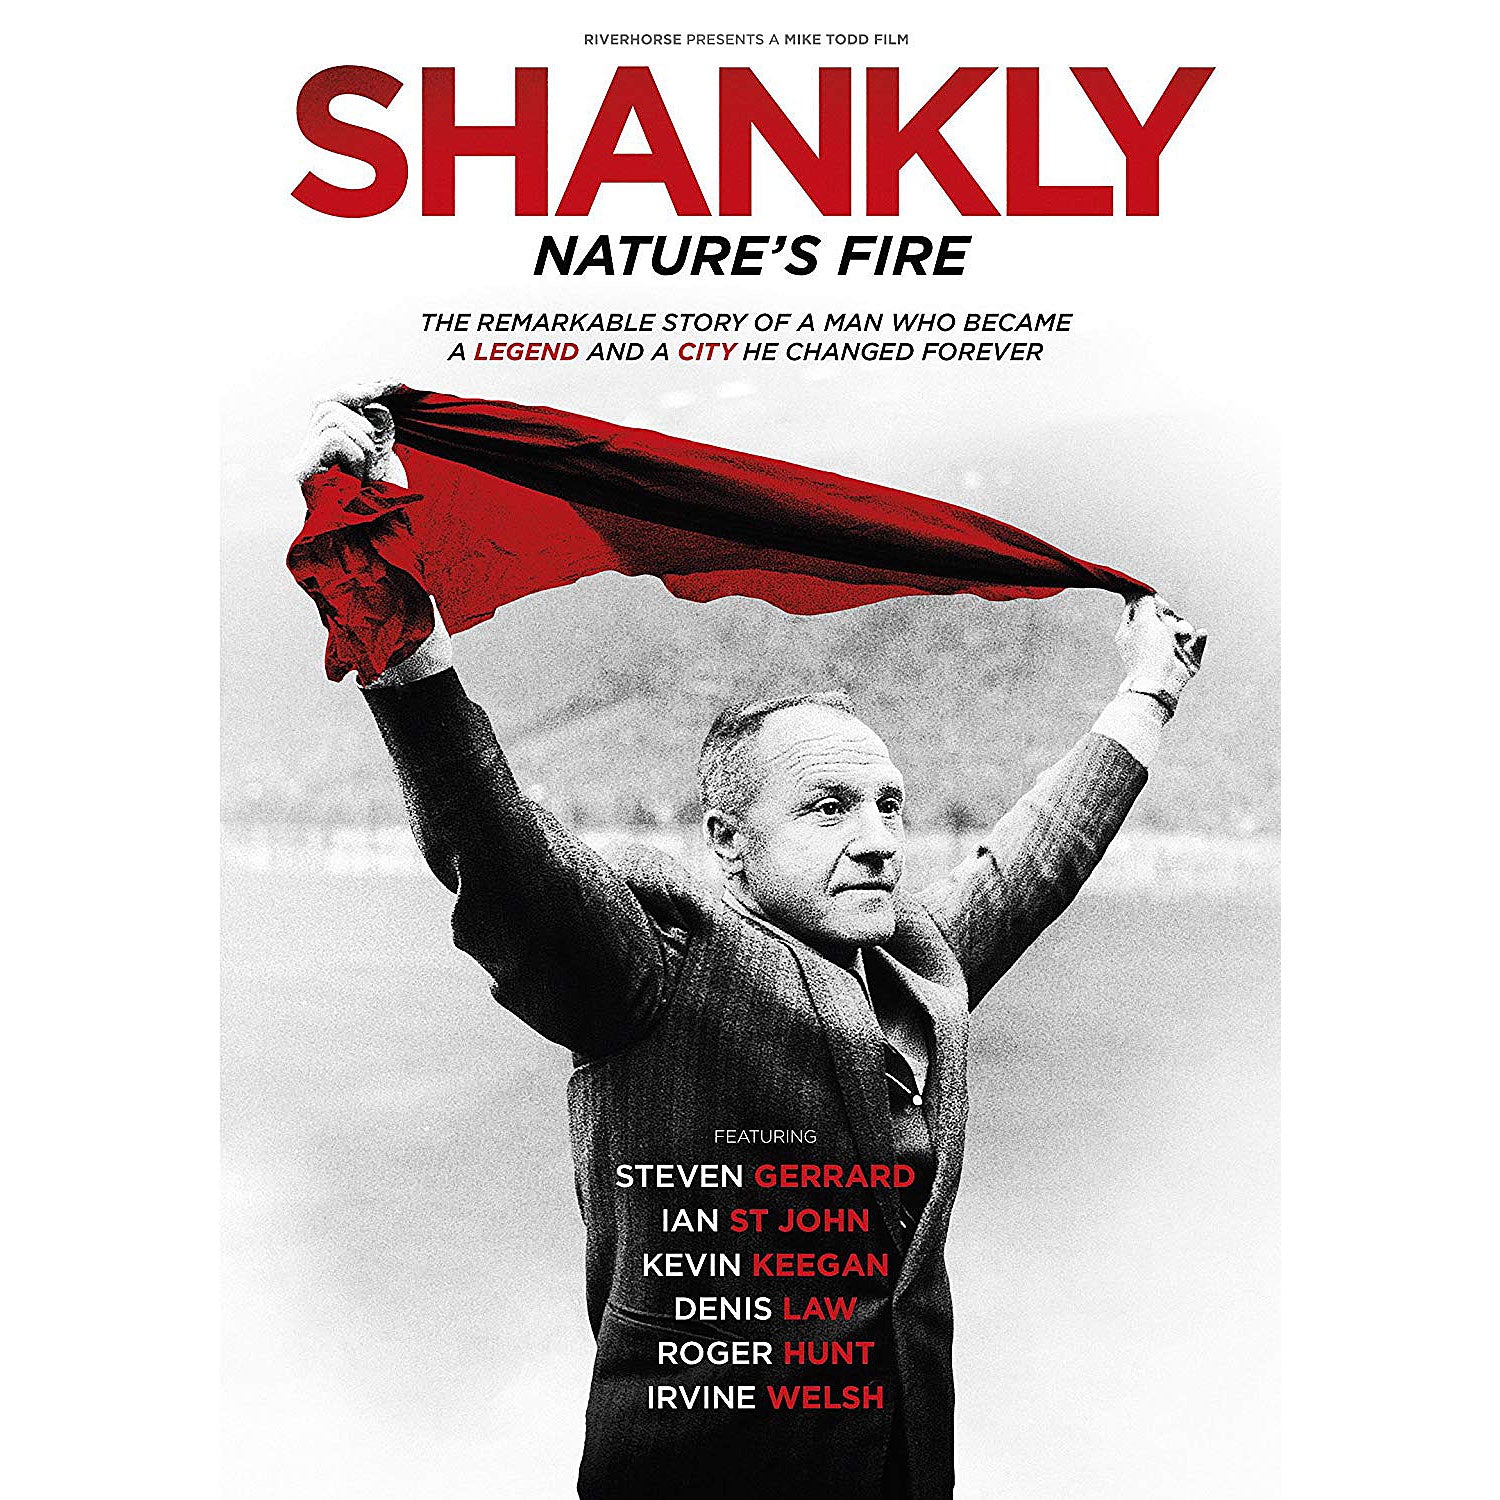 Shankly – Nature's Fire